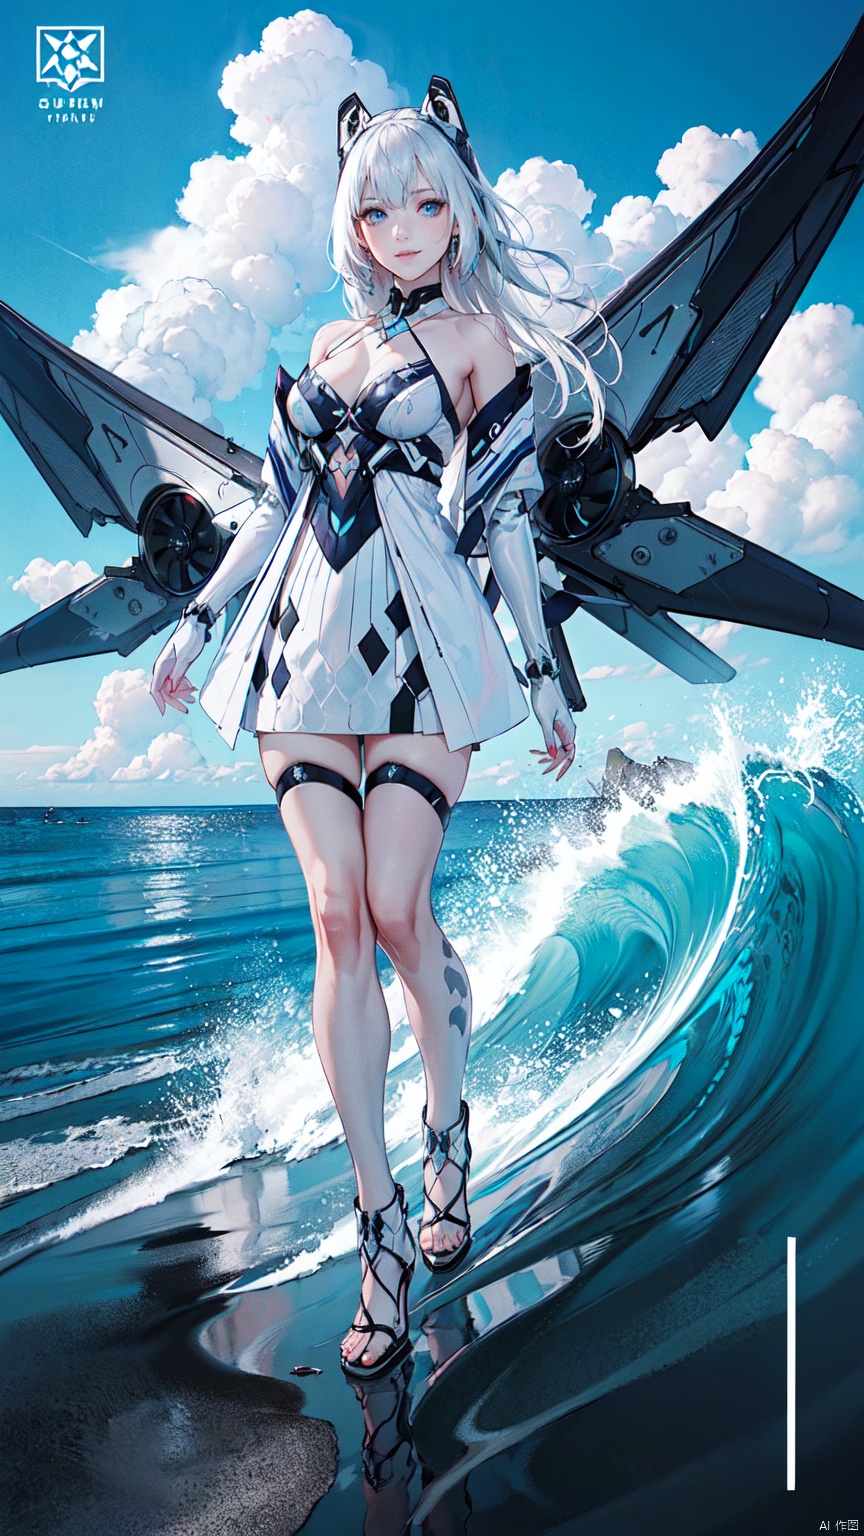 simple_blue_background,  golden and white theme,  Sense of coordination,  sense of order,  mathematics beauty,  (((cover design))),  (((((cover art))))),  ((trim)),  album_art,  official art,  (Master's work),  full body,  ( closeup,  1girl, solo:1.2),  white dress, tianqi, white mechanical wings, blue eyes, long hair, white hair, breasts, bare shoulders, animalears, boots, bangs, cloud,  sky,  summer,  water patterns,  white geometry,  colorful geometry,  reflection,  crystal_art,  pattern_design,  creative,  Mystery pattern,  colorful crystal decorate,  blue crystal,  (architectural art),  ((geometric art)),  pattern design,  creative,  shine,  dream,  swimming in ocean,  happy summer,  beach,  sandals,  waves,  ------,  Low saturation,  grand masterpiece,  Perfect composition,  film light,  light art,  beautiful face,<lora:EMS-191421-EMS:0.200000>,<lora:EMS-270043-EMS:0.700000>,<lora:EMS-5034-EMS:0.200000>